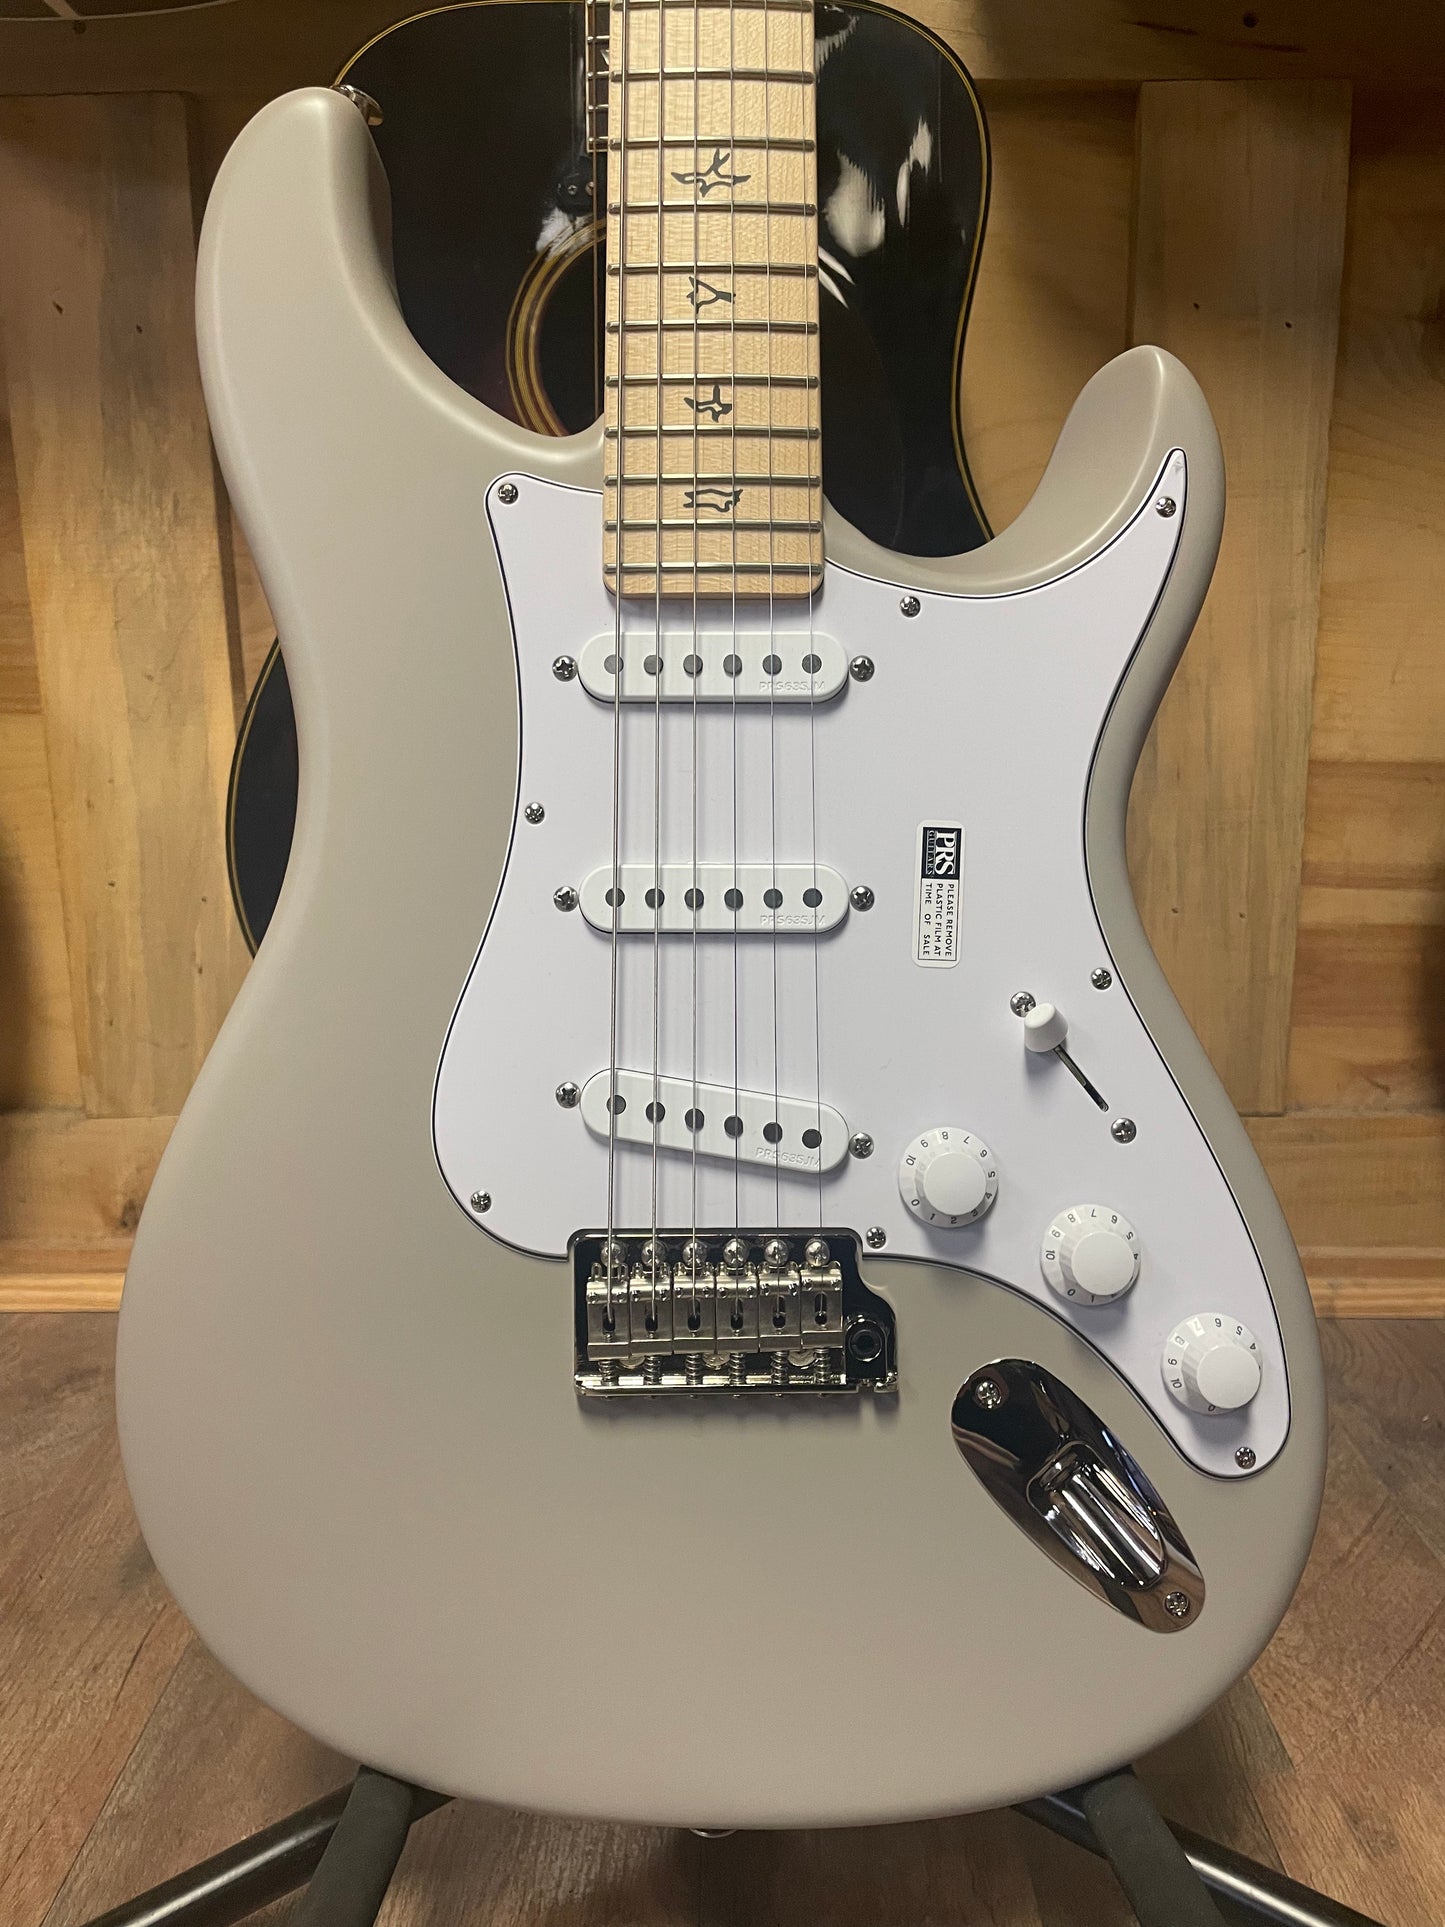 PRS Silver Sky Electric Guitar - Satin Moc Sand with Maple Fingerboard (NEW)